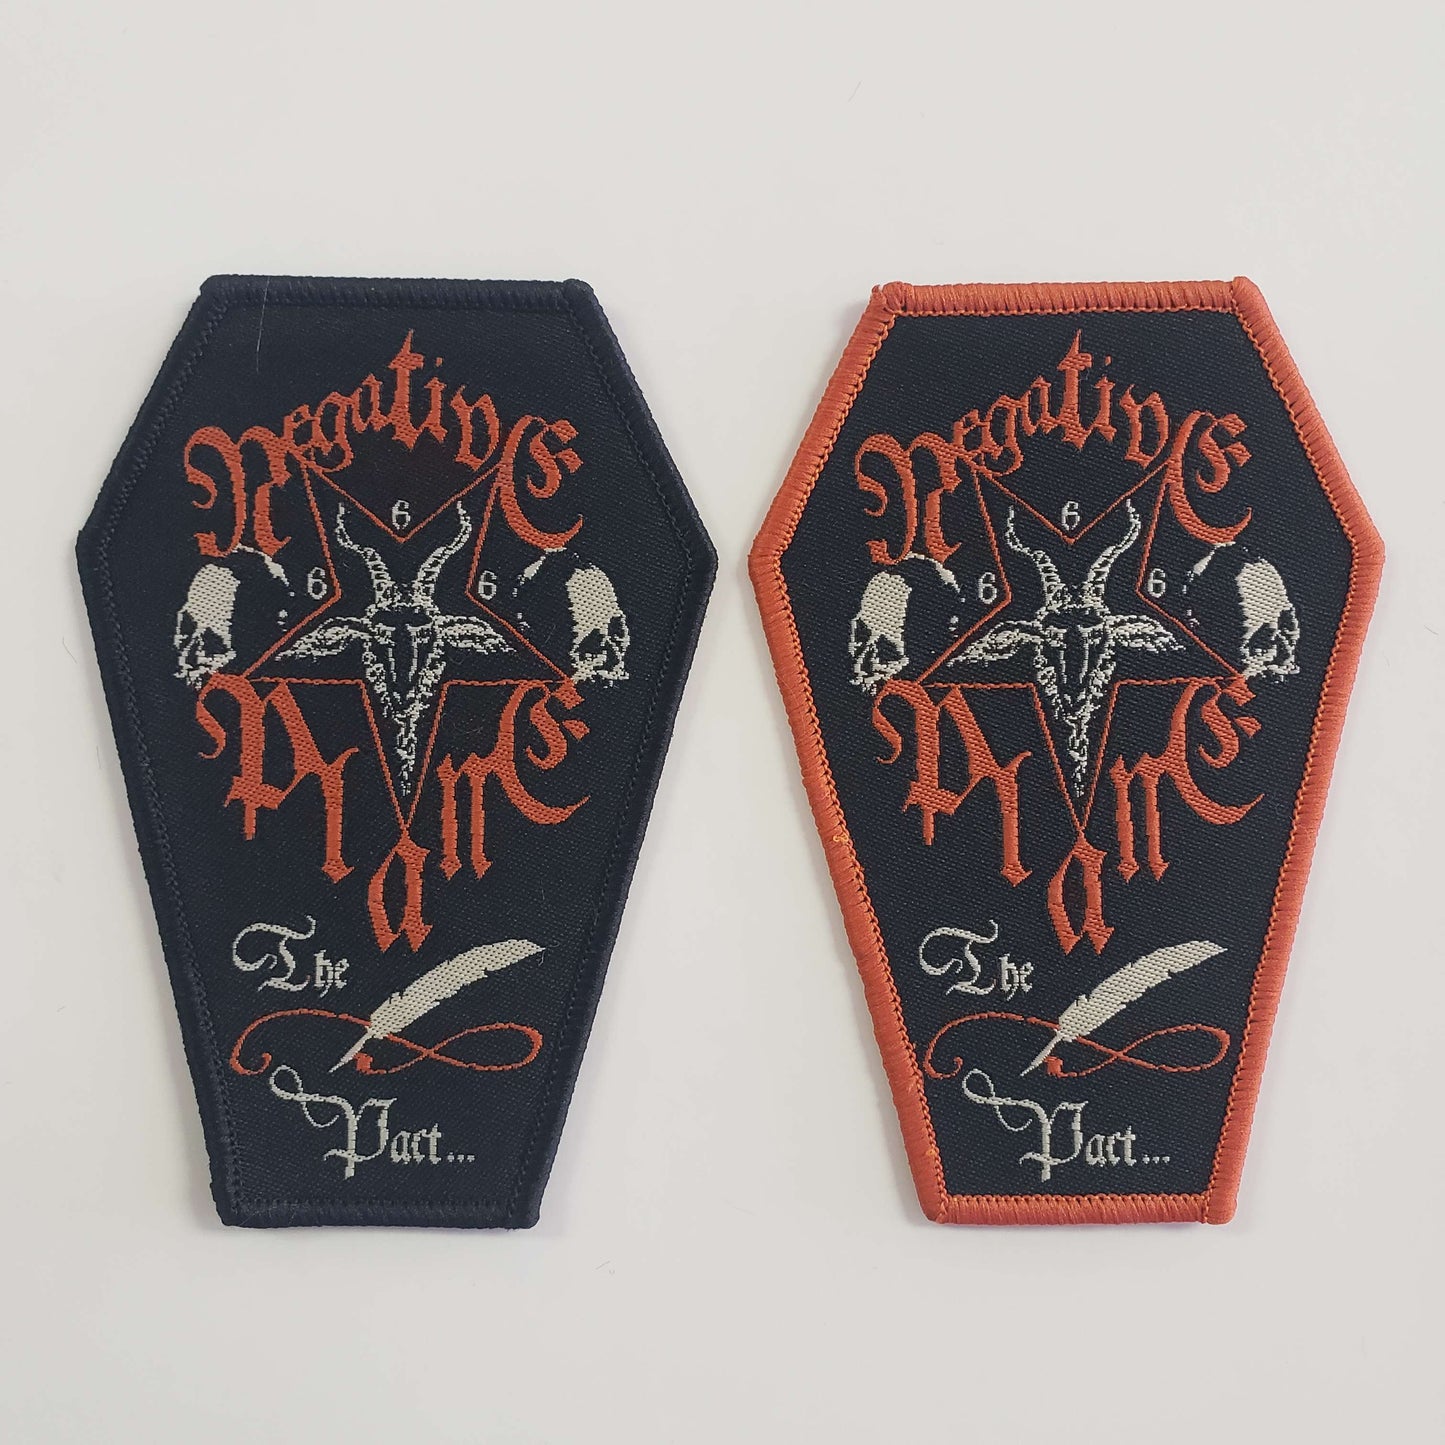 Negative Plane - The Pact patch